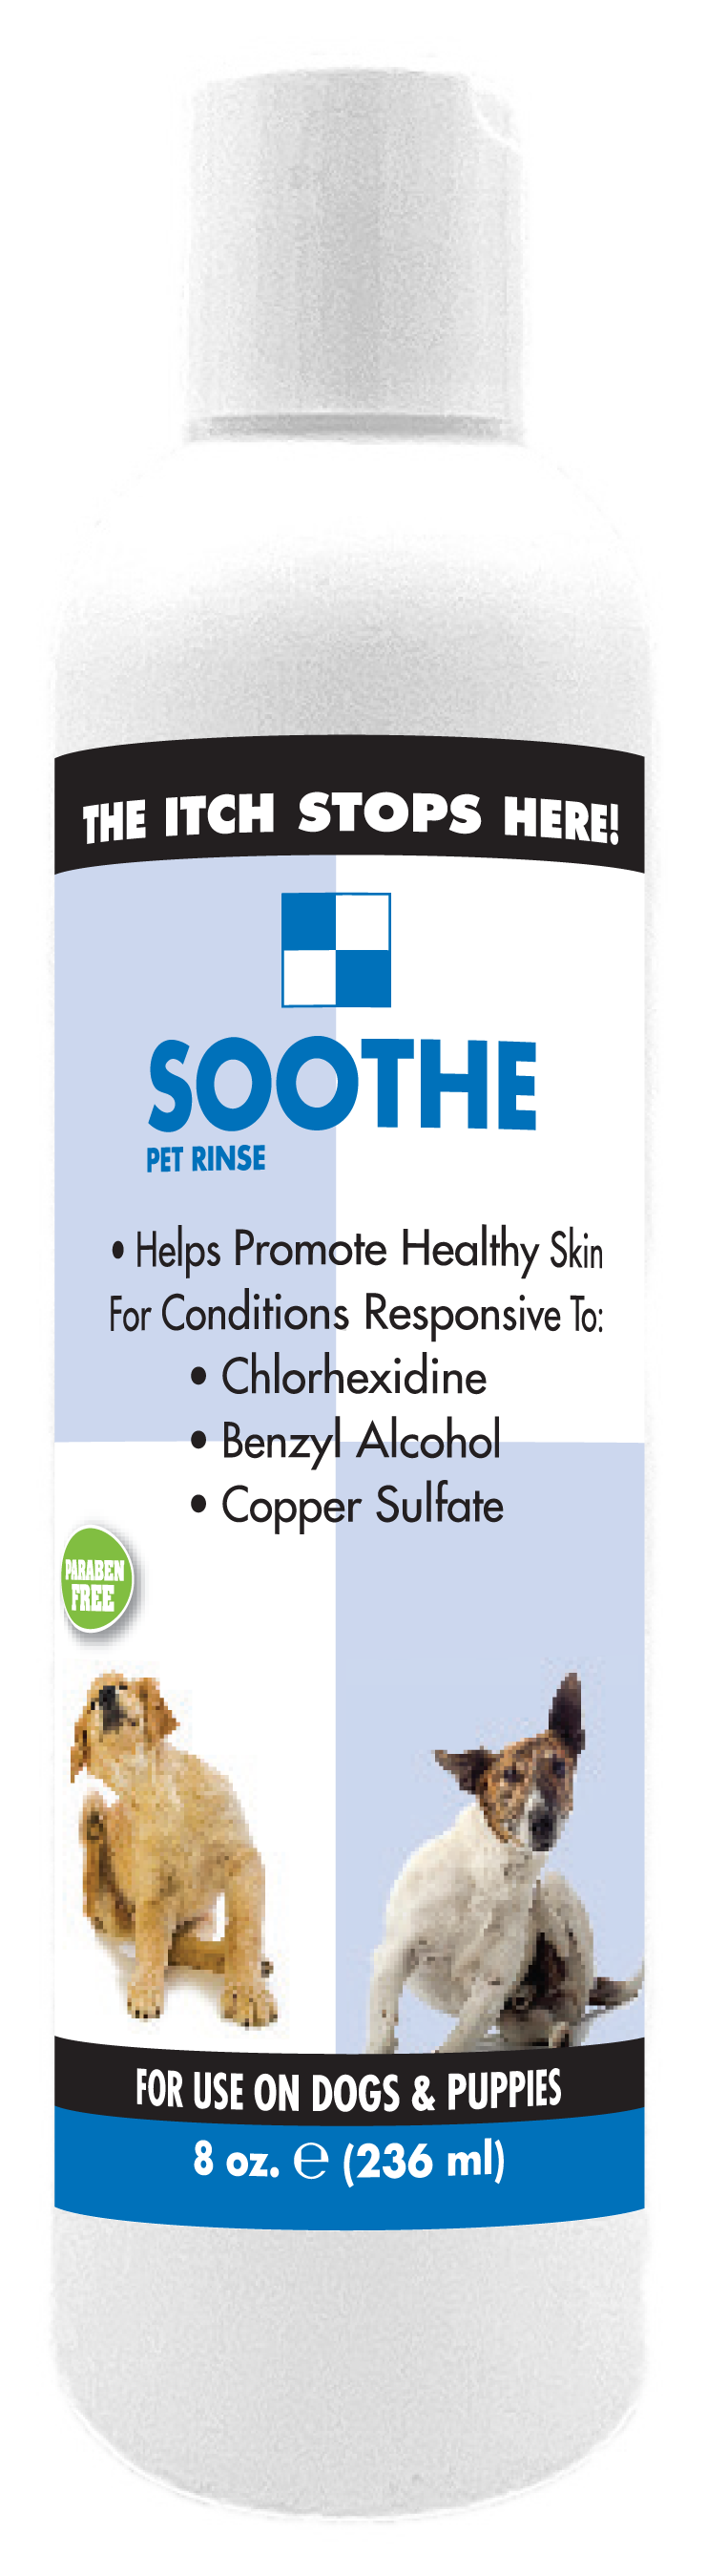 Soothe™ MEDICATED Rinse & Conditioner